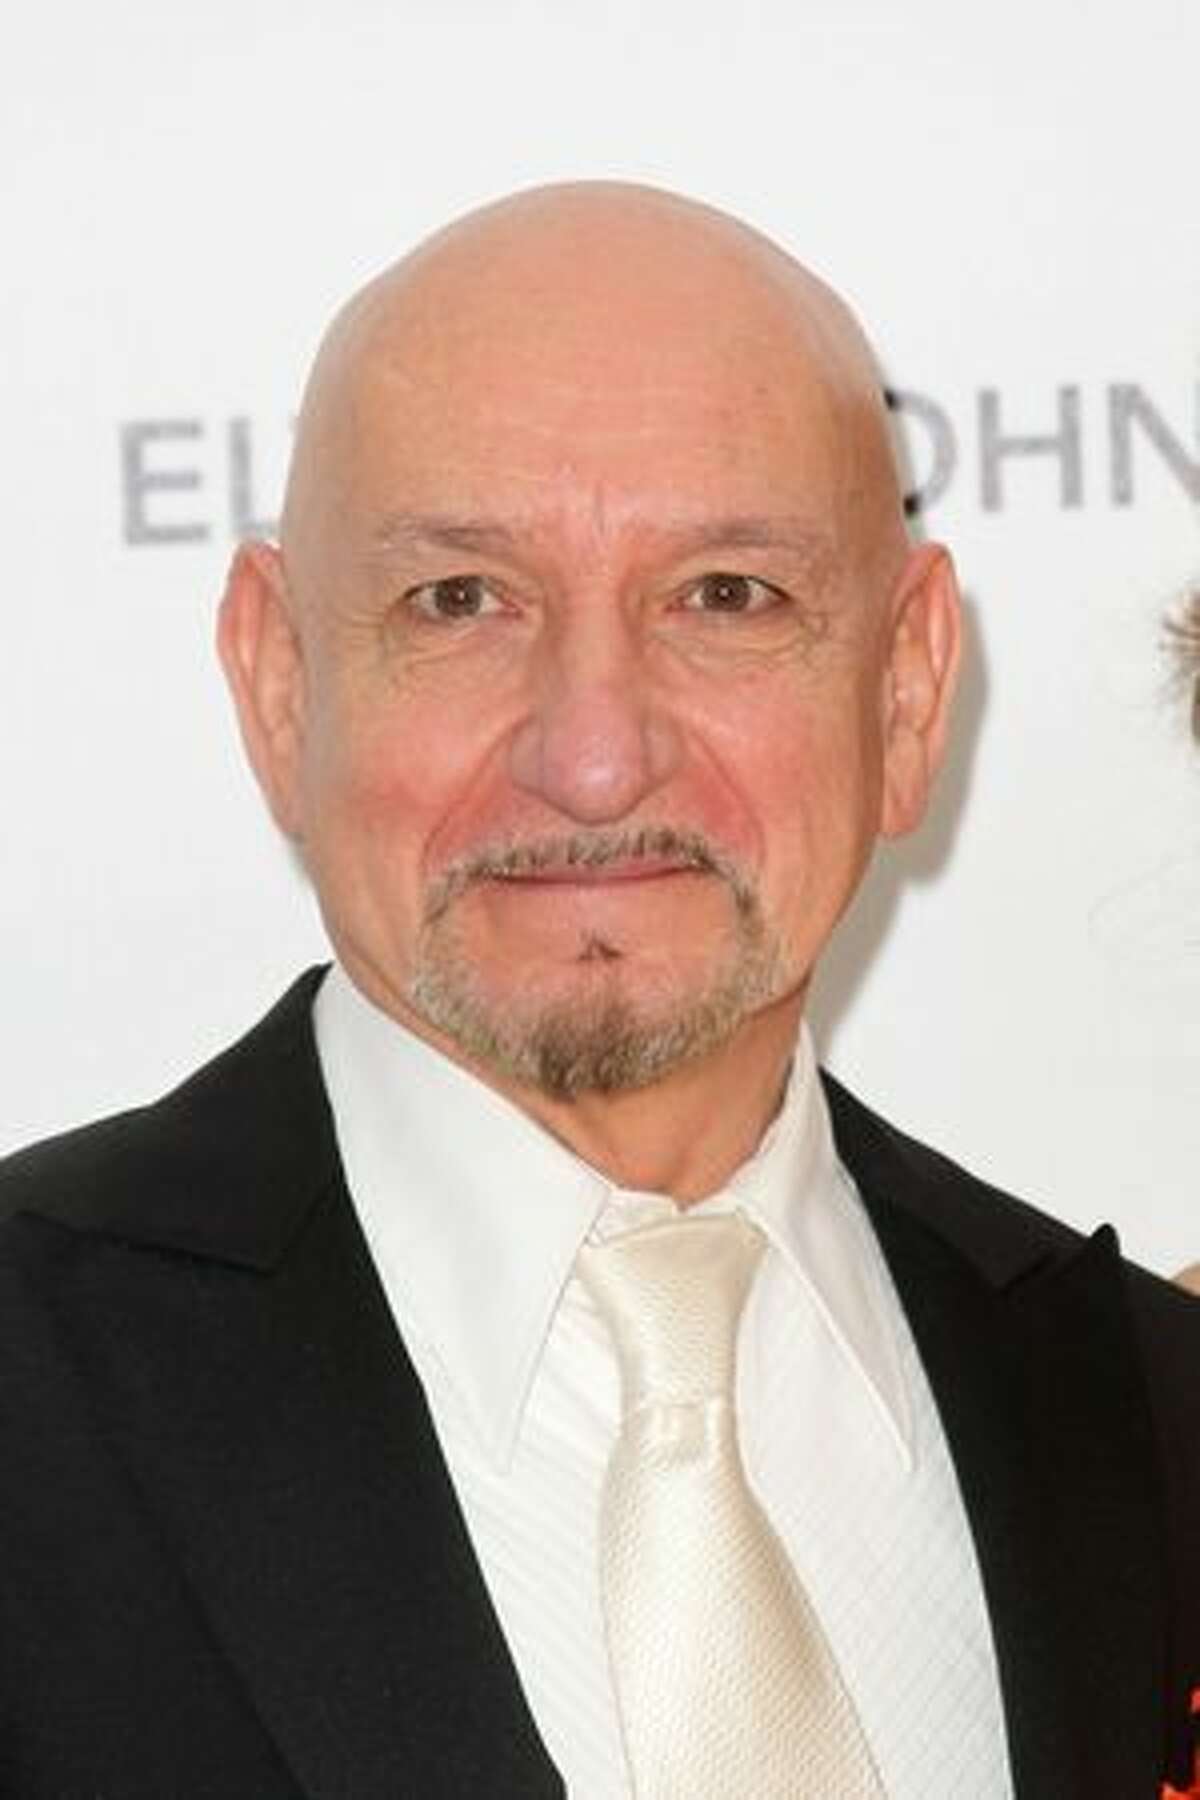 Actor Ben Kingsley arrives at the 19th Annual Elton John AIDS Foundation's Oscar viewing party held at the Pacific Design Center in West Hollywood, California.